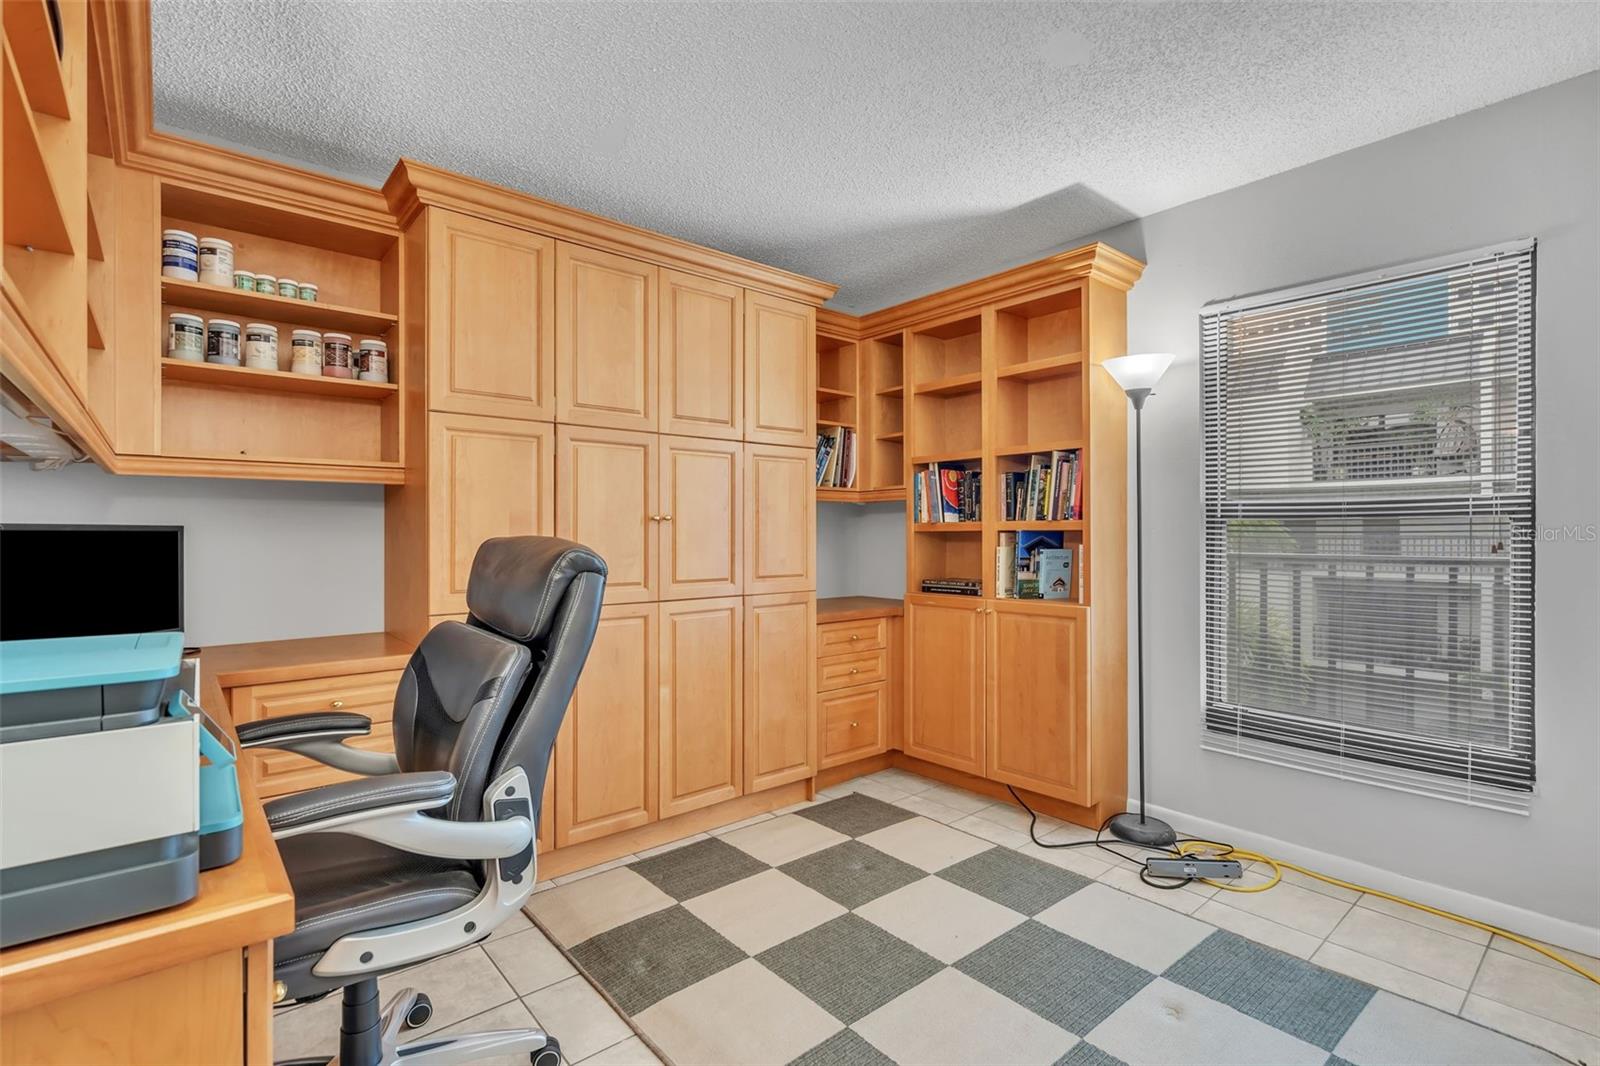 BR #2/DEN OR OFFICE WITH MURPHY BED